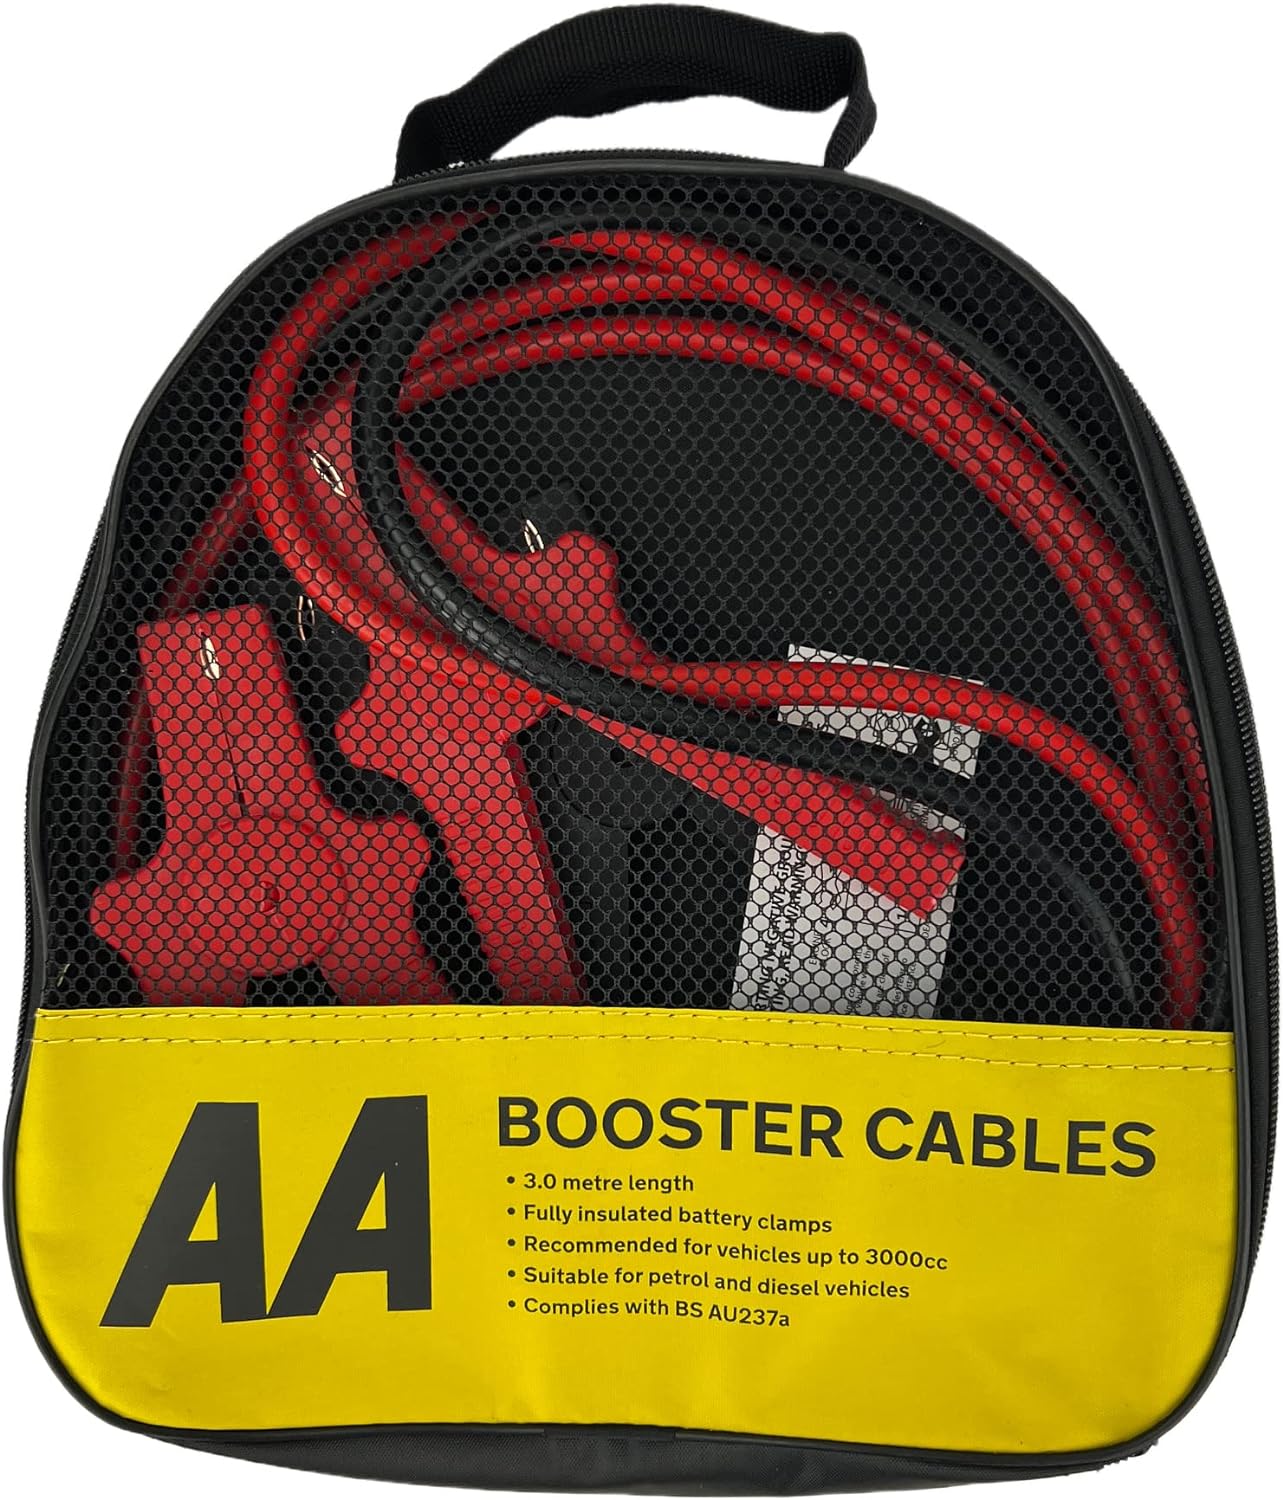 AA Insulated Booster Cables/Jump Leads AA4550-4550